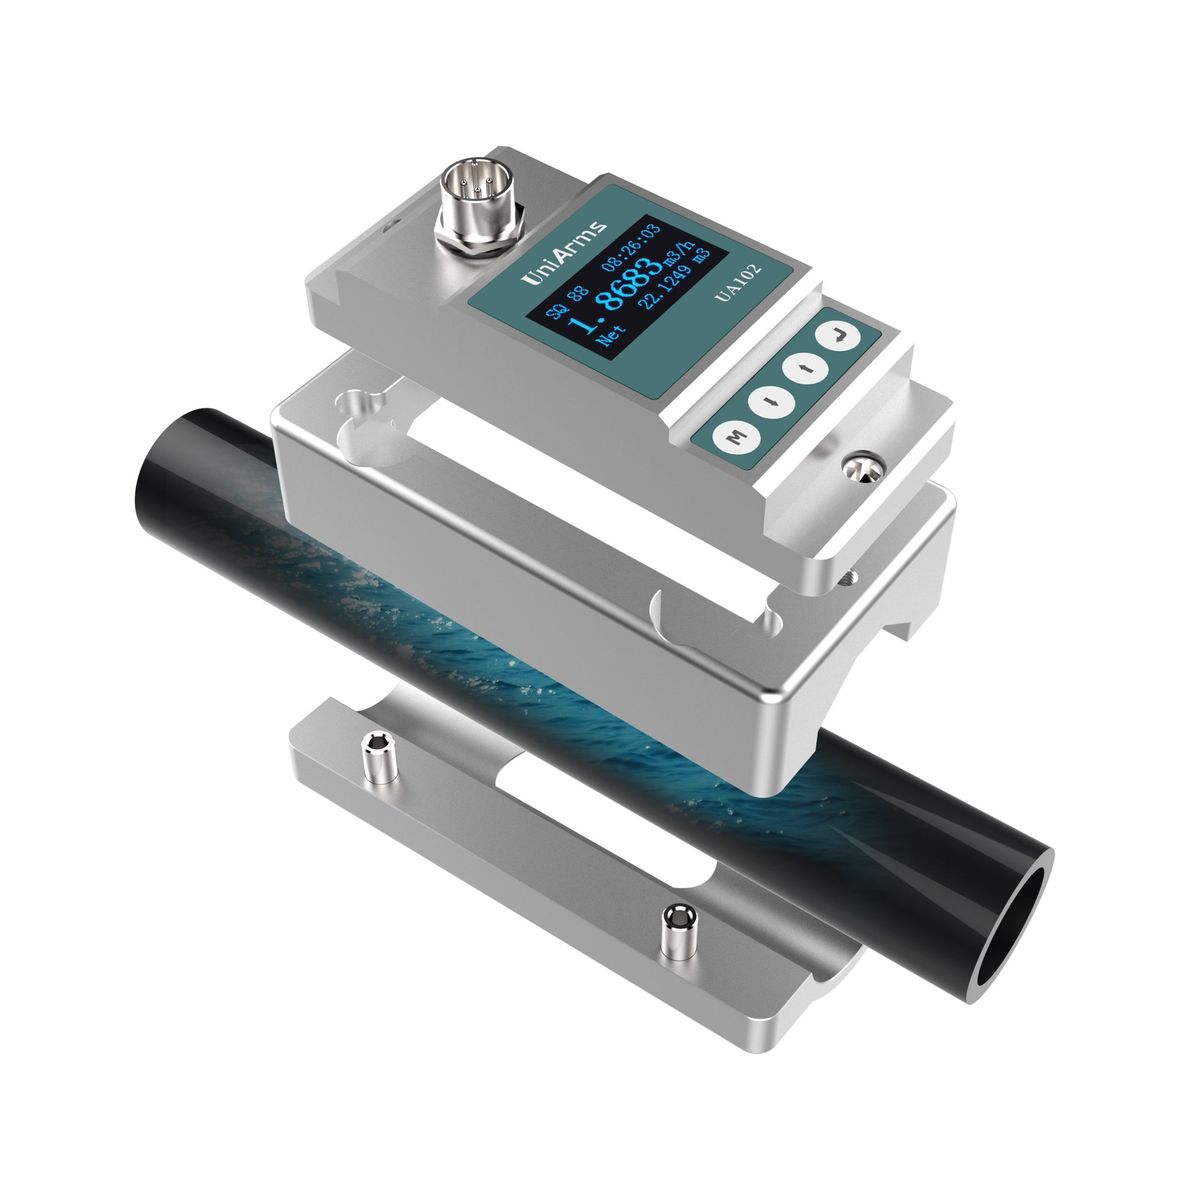 Uniarms OD63 Ultrasonic Flow Meter Clamp-on 24V OLED 4-20mA Modbus IoT